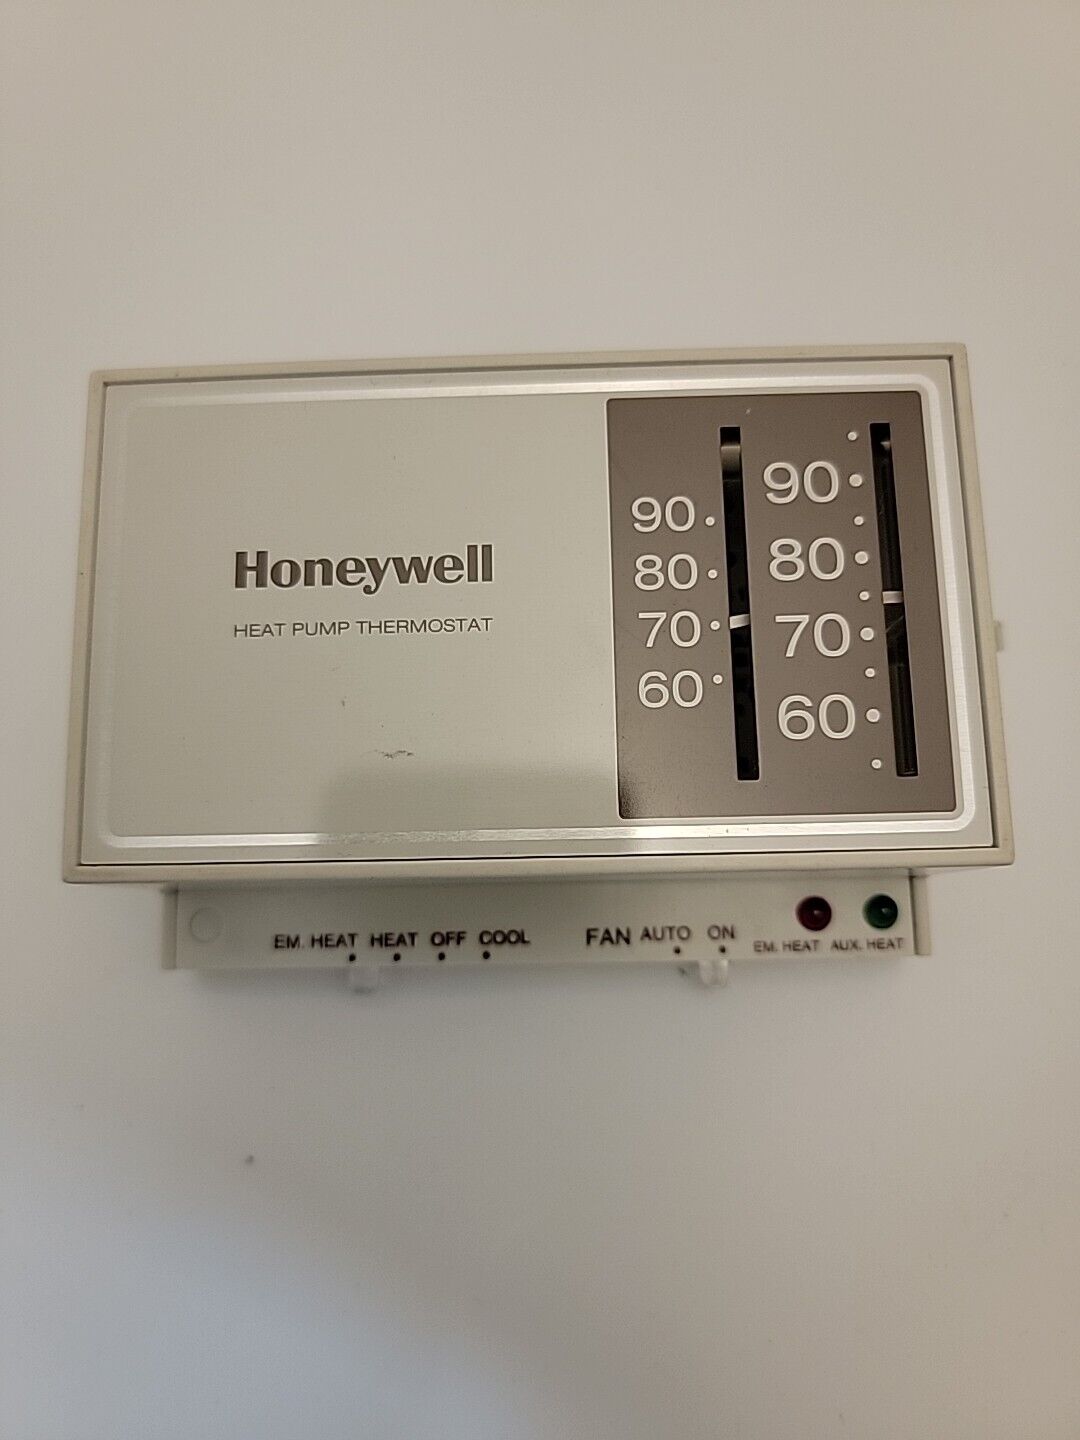 Vintage Honeywell Comfort SYSTEM USA T841 A 1712 Heating Thermostat